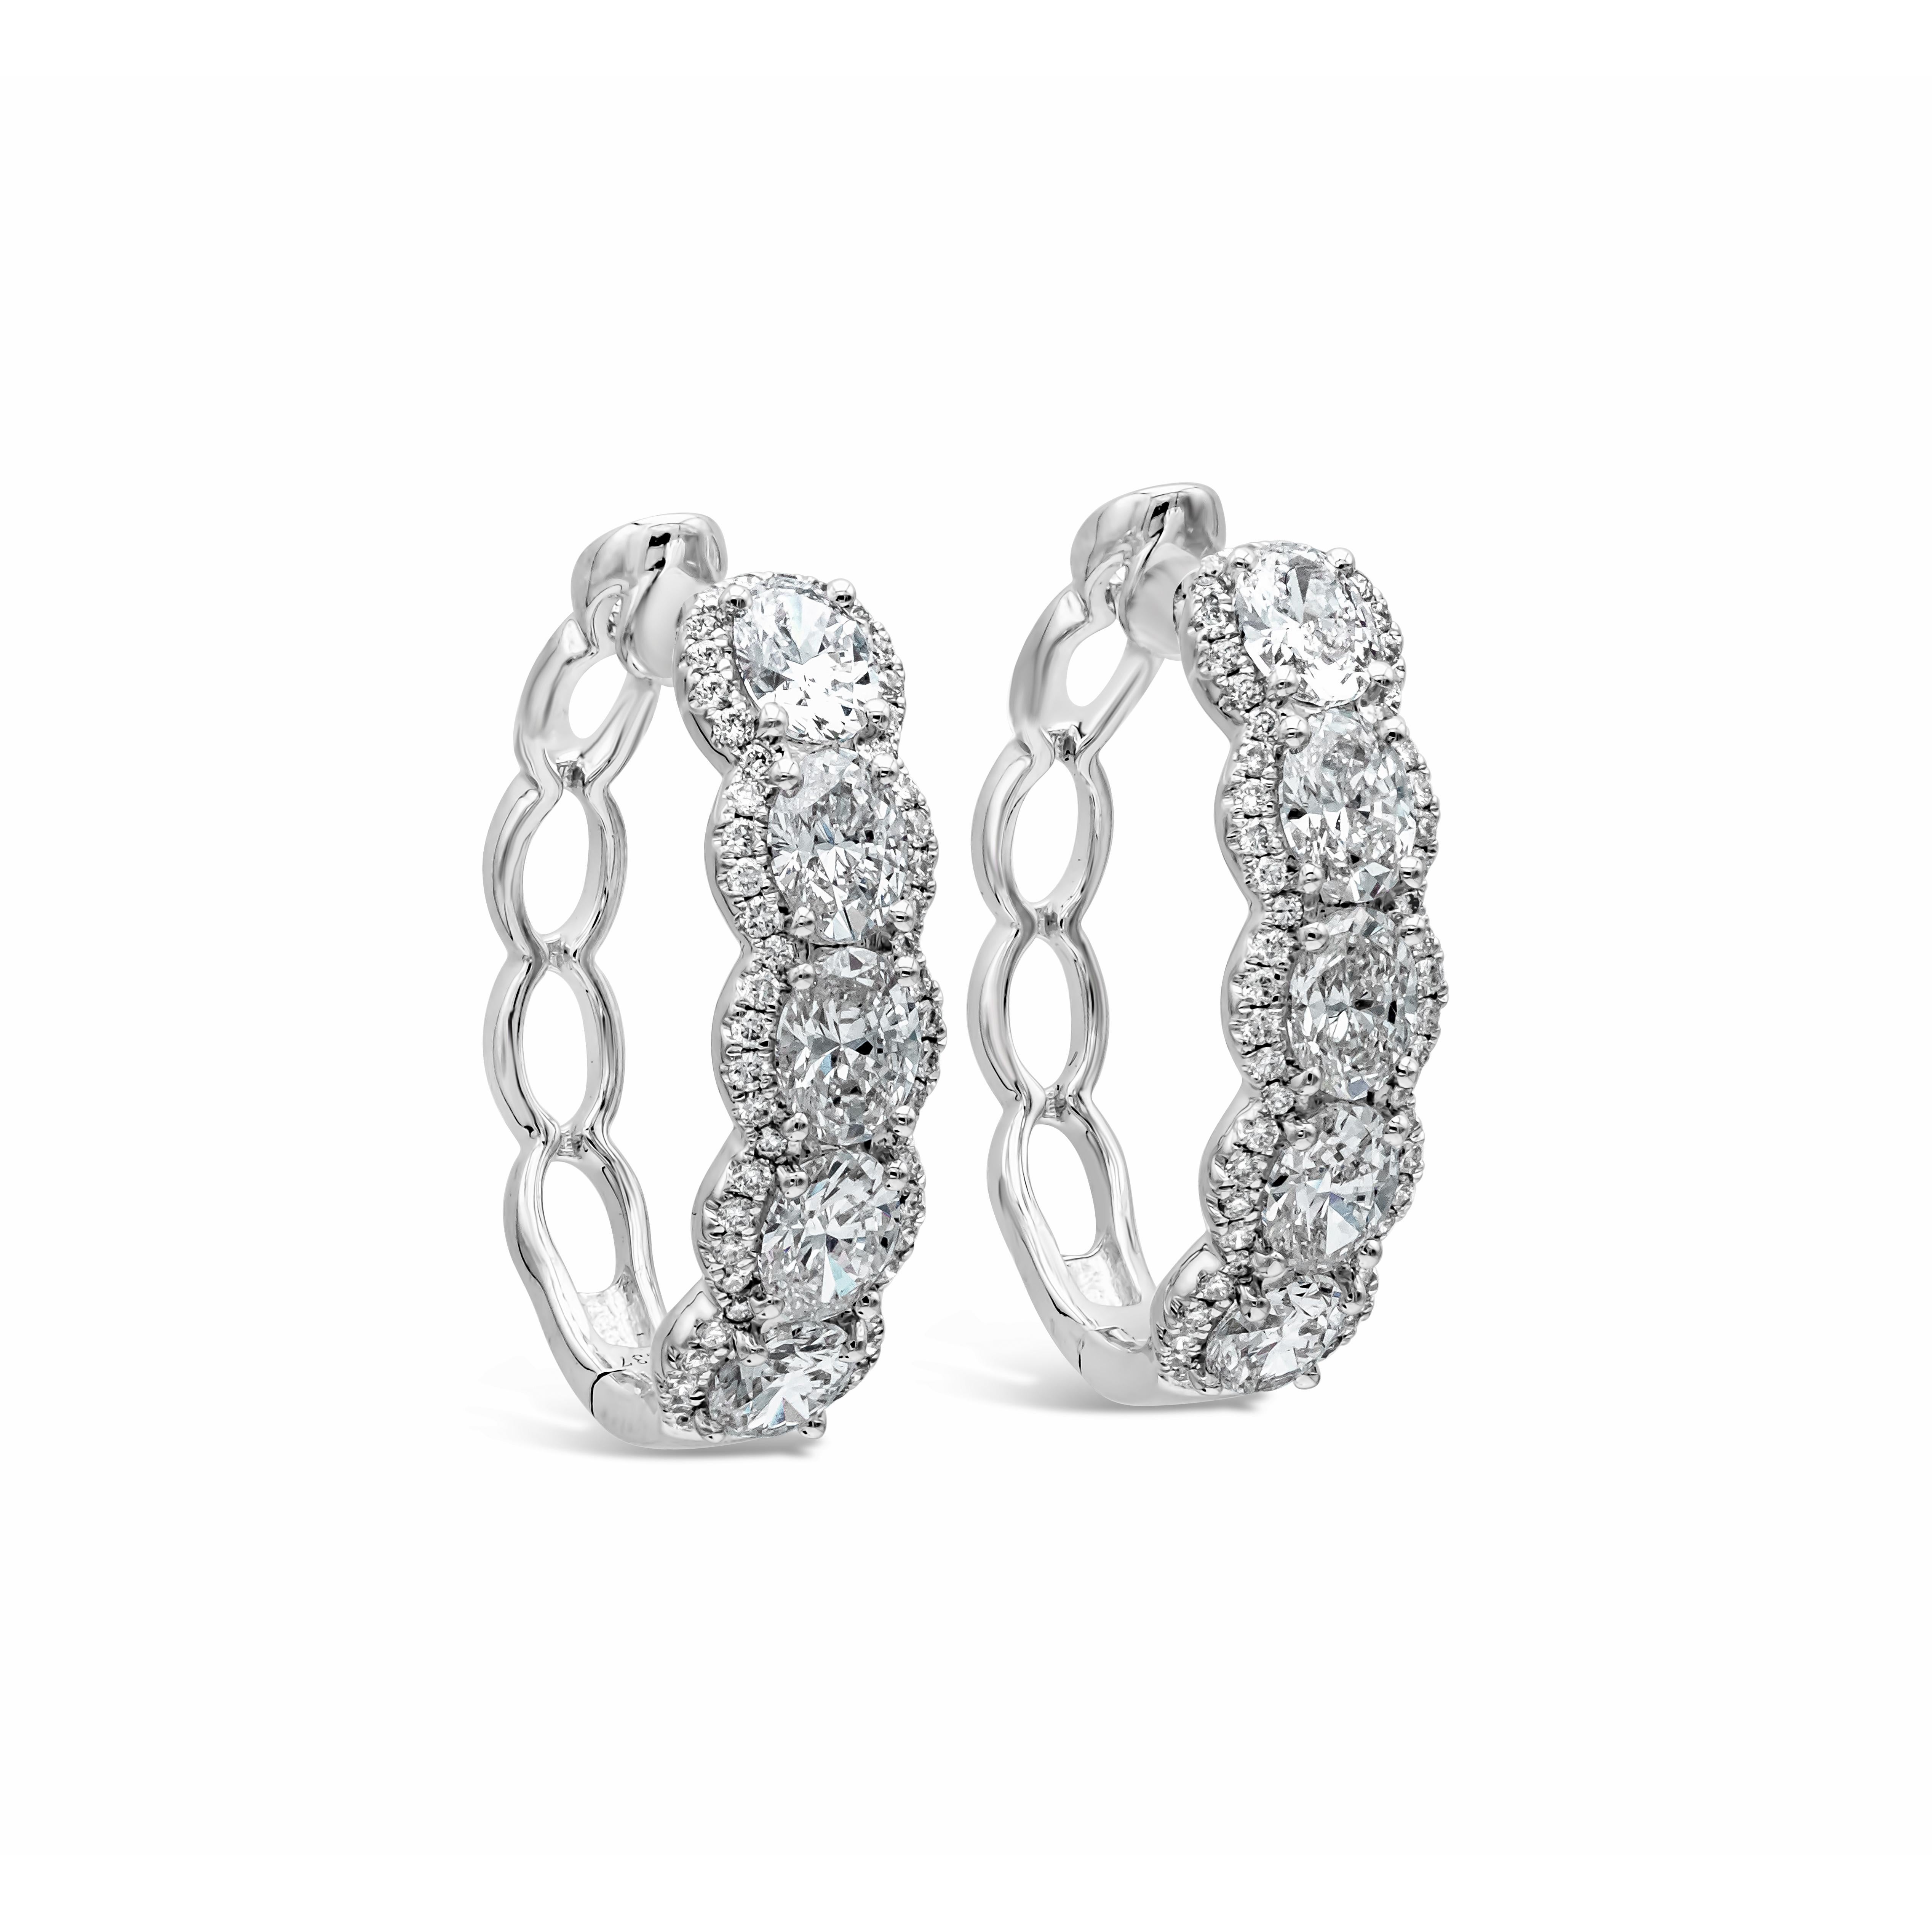 This beautiful pair of oval shape hoop earrings showcases five oval cut diamonds on each earring. Outlined on two sides by a row of brilliant round diamonds. Diamonds weigh 2.73 carats total. Made in 18k white gold. 

Style available in different